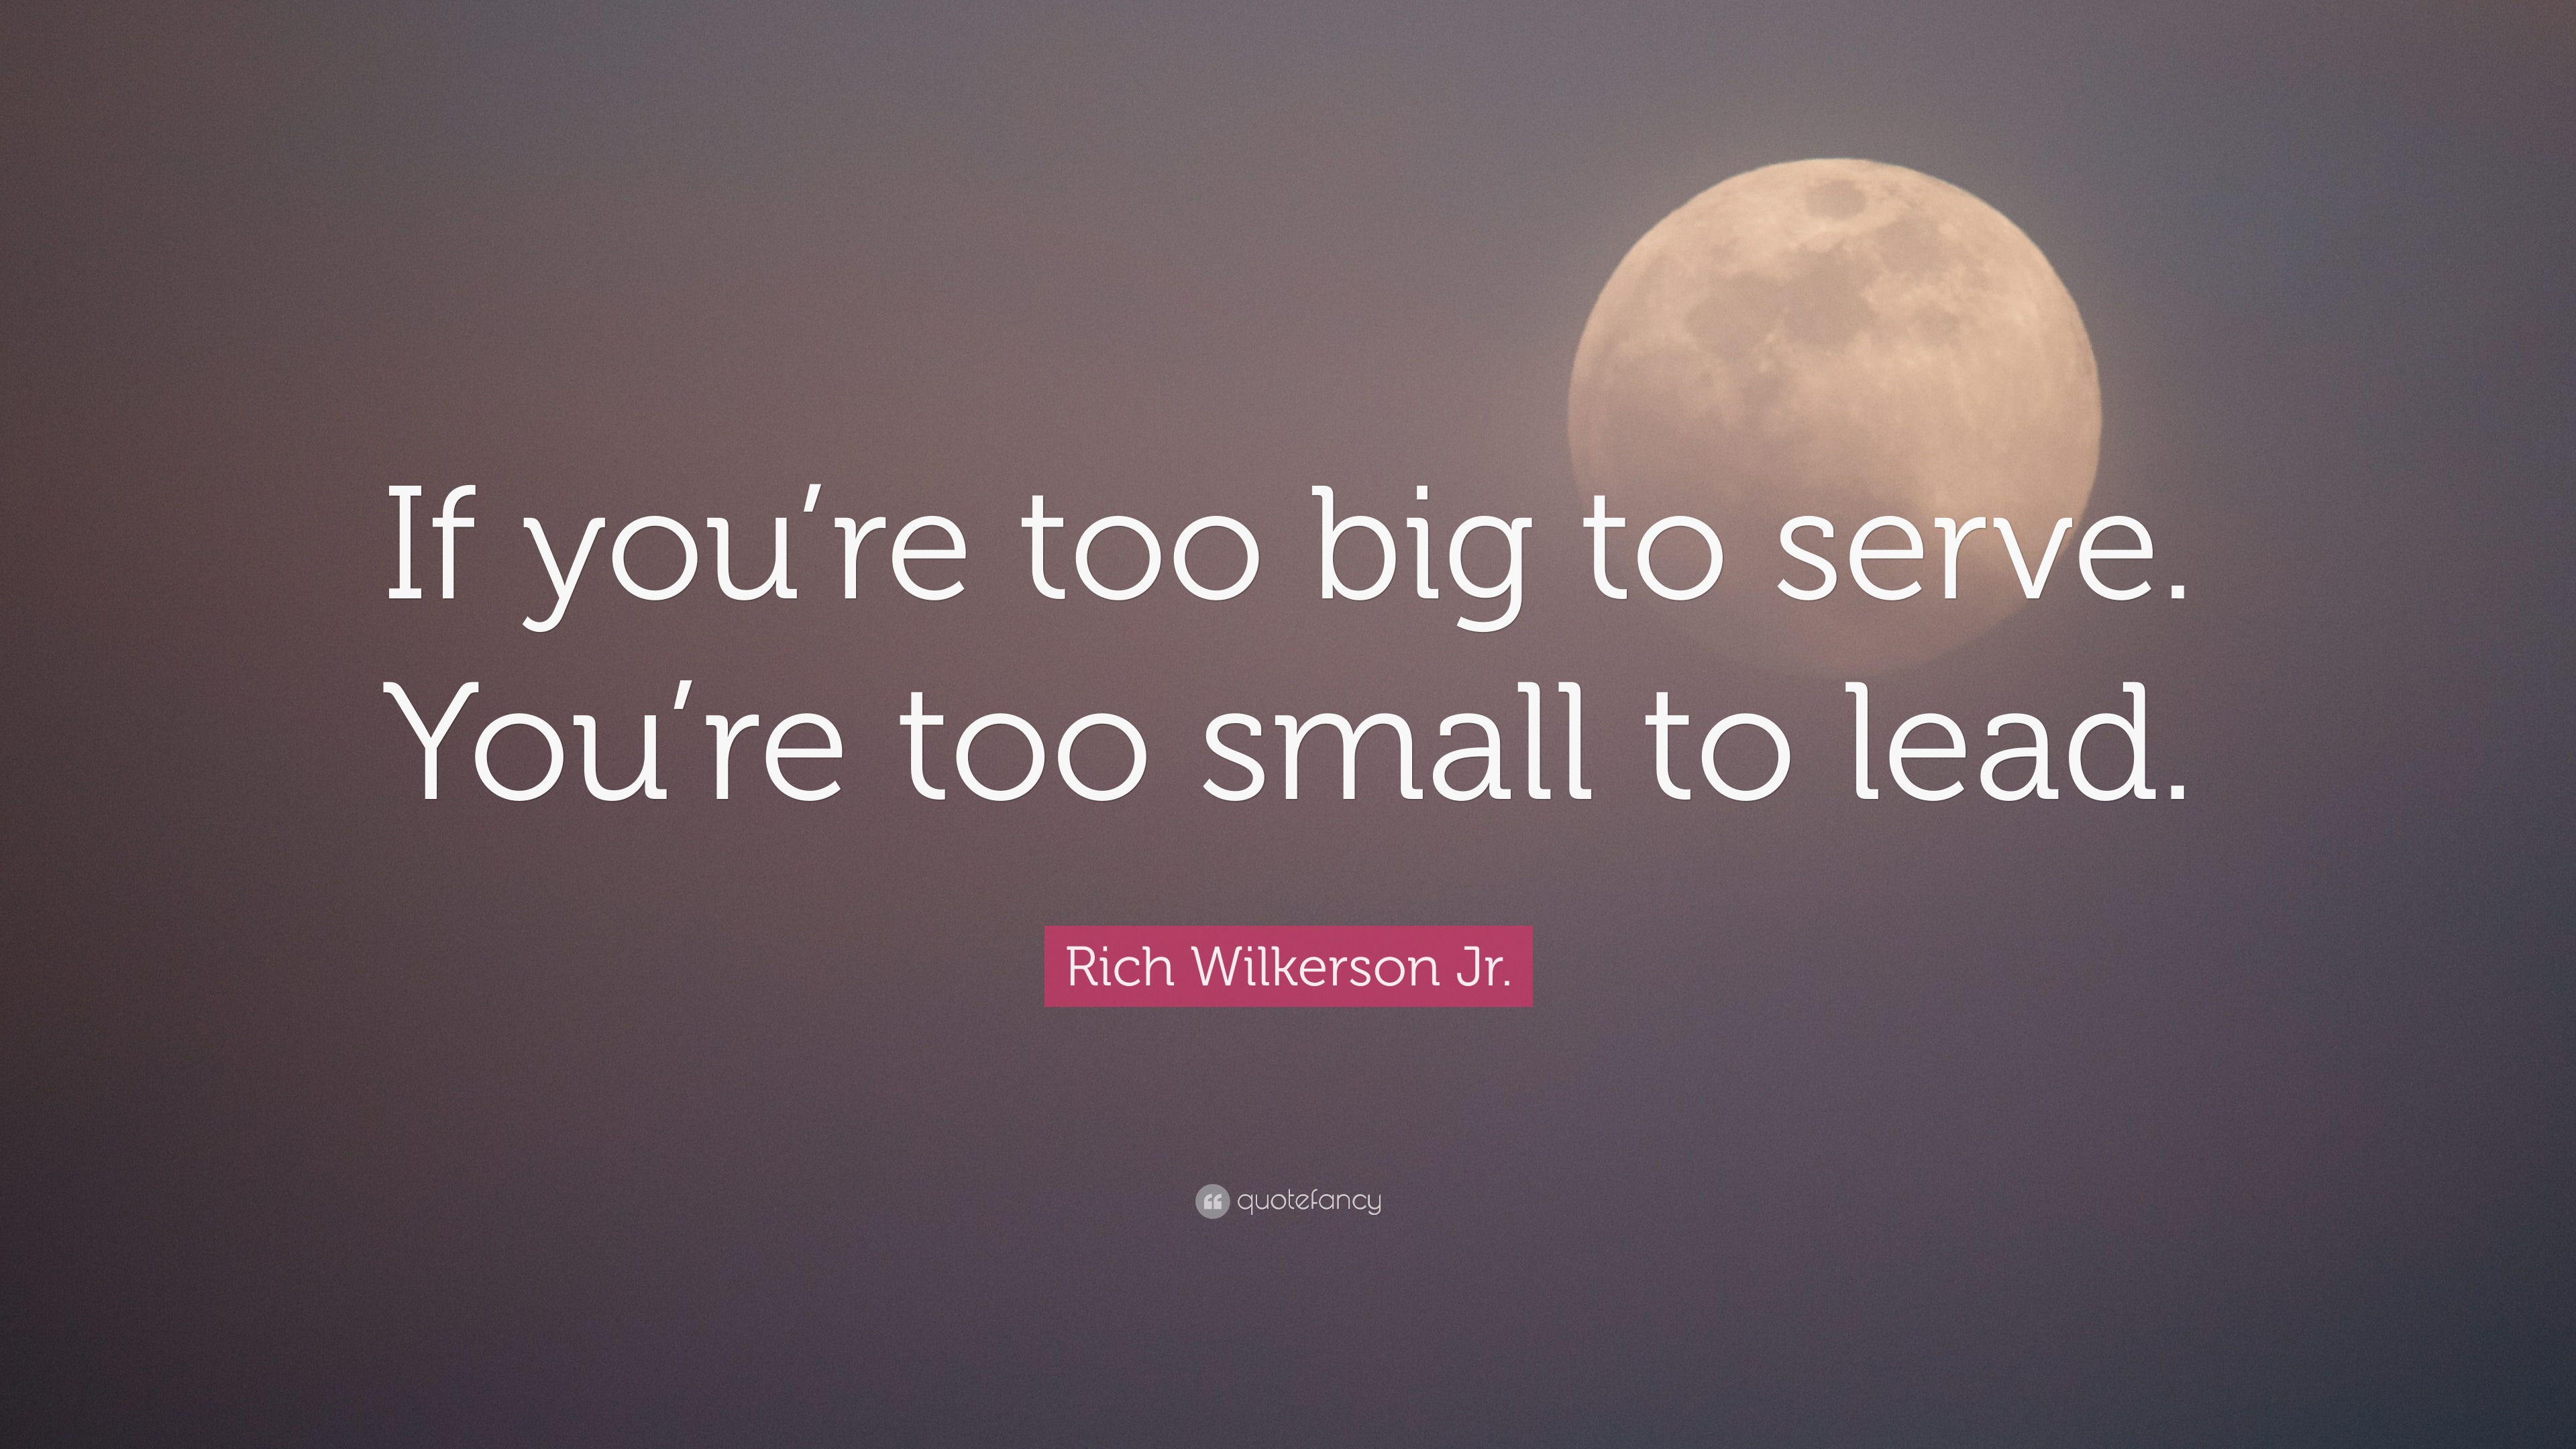 Rich Wilkerson Jr. Quote: “If you're too big to serve. You're too